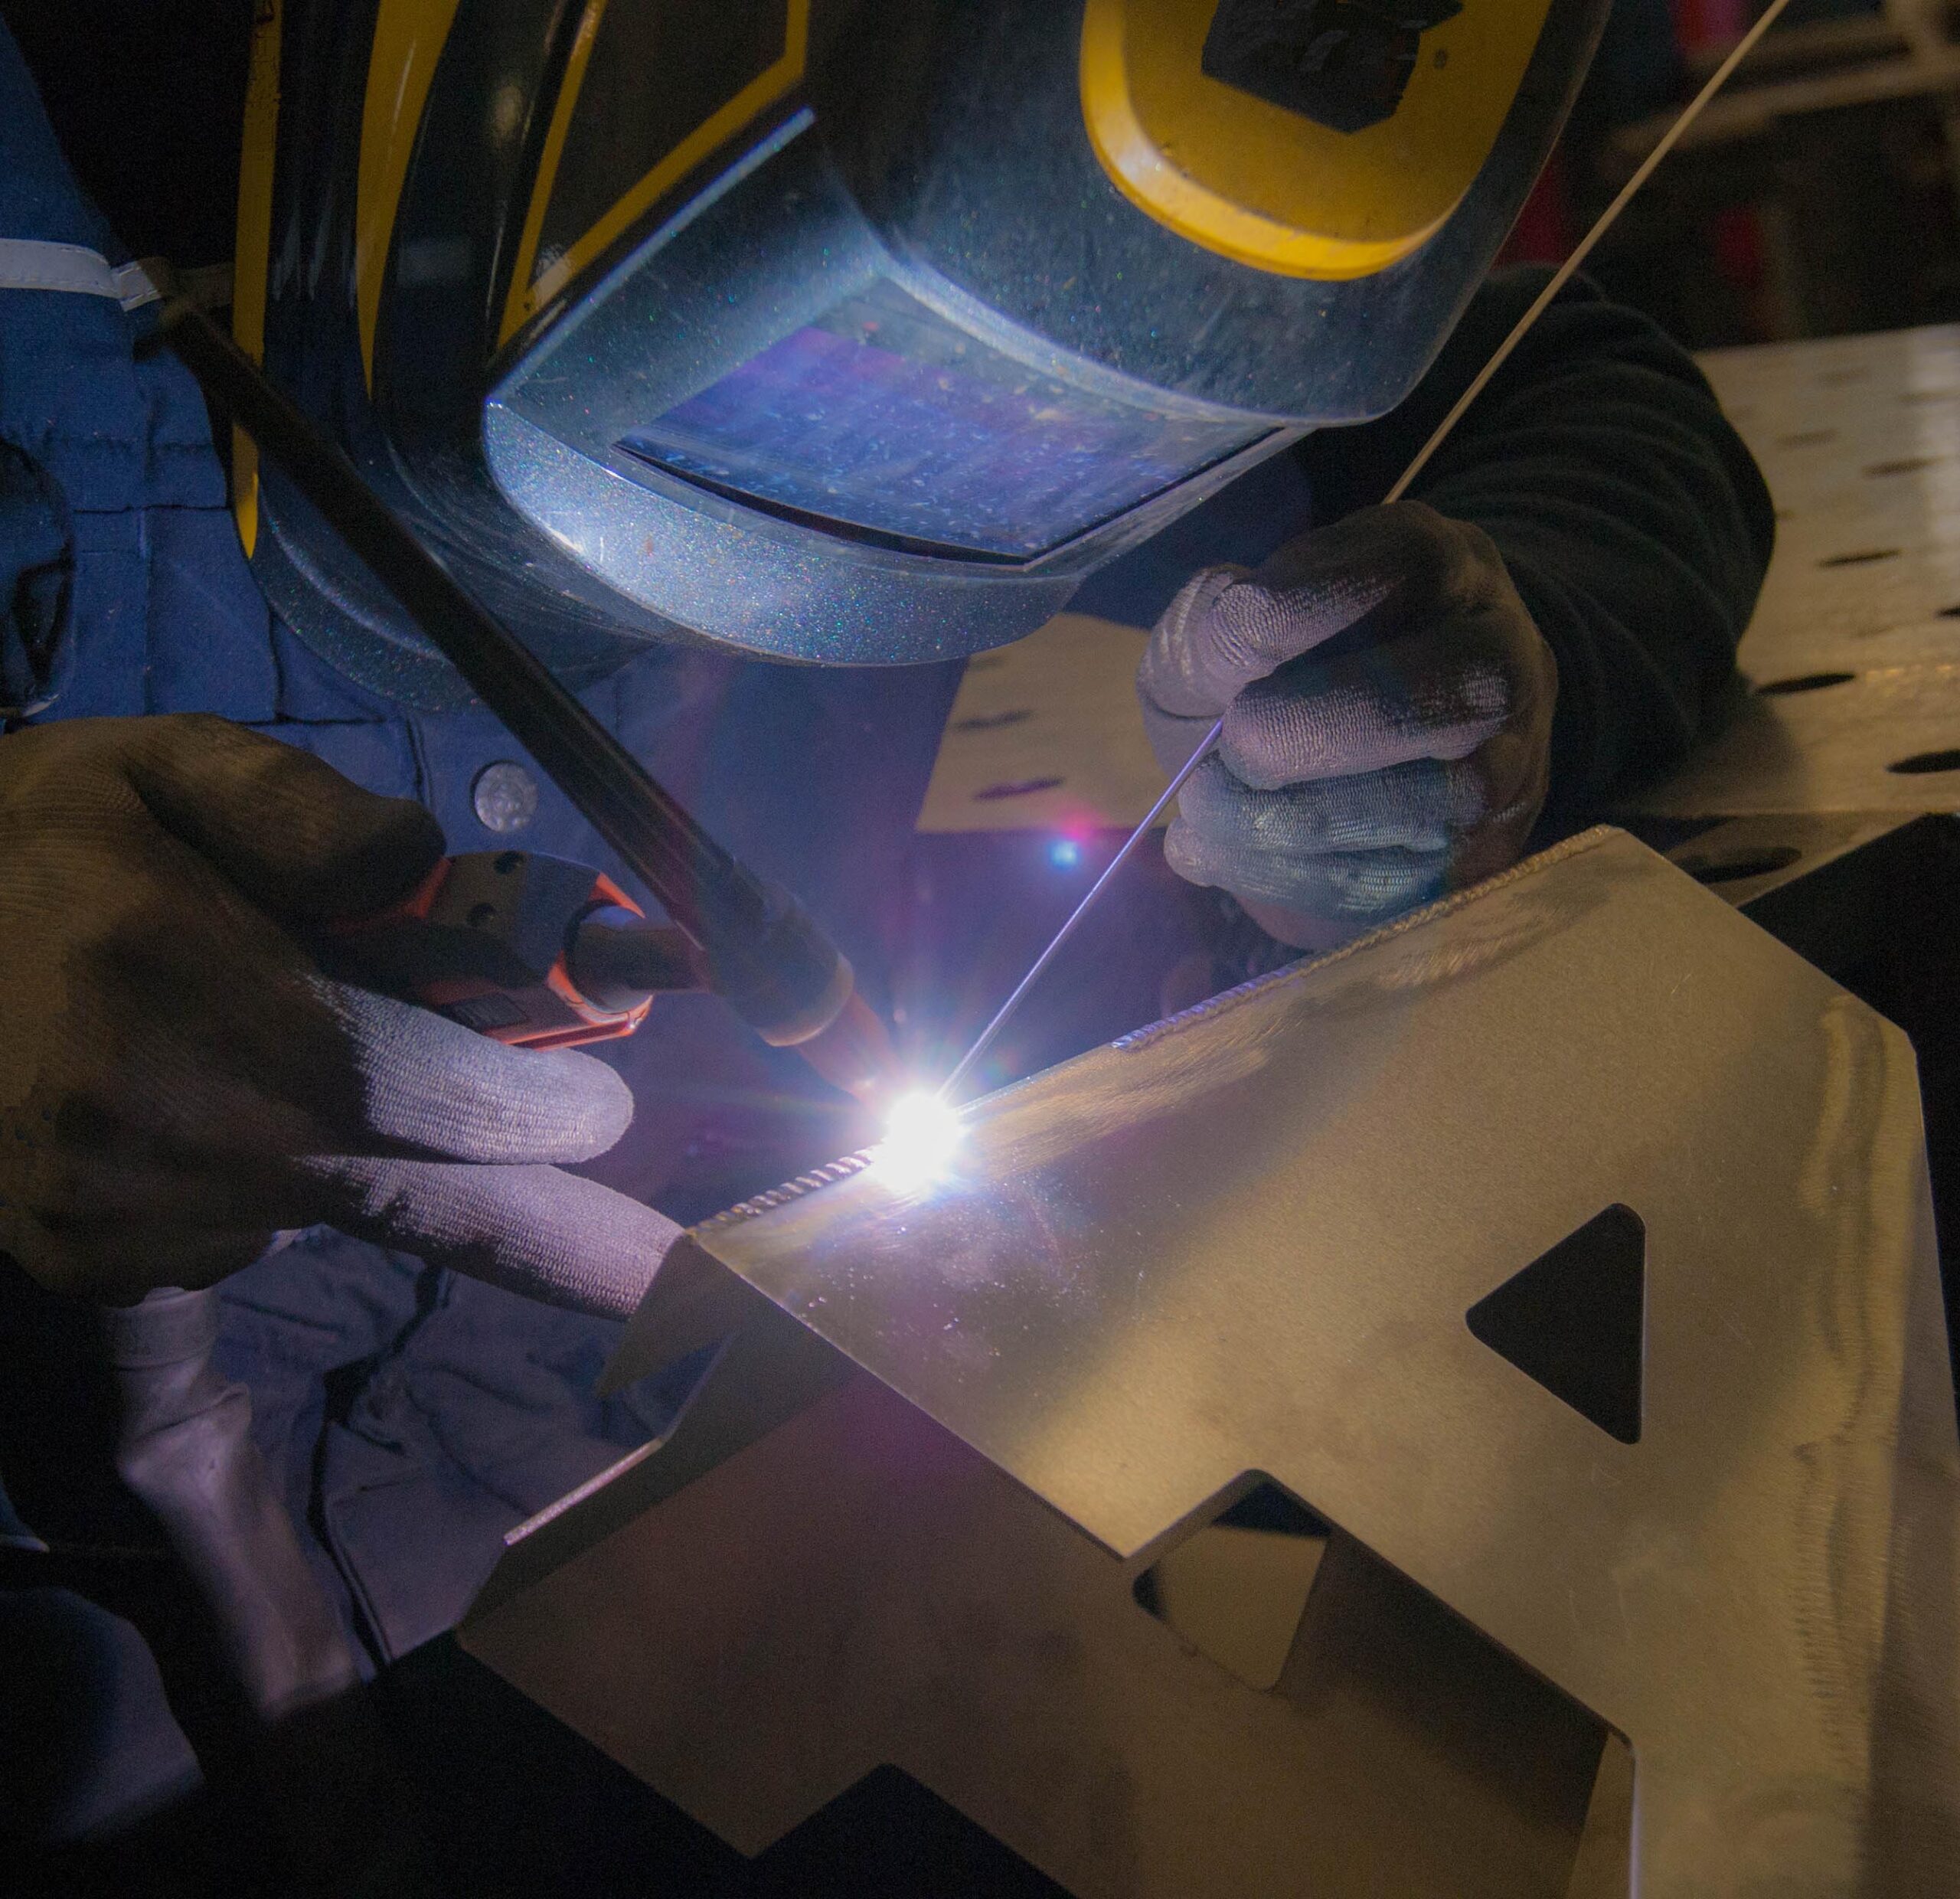 man is welding tig mode an alluminium letter, he is concentrate on his work